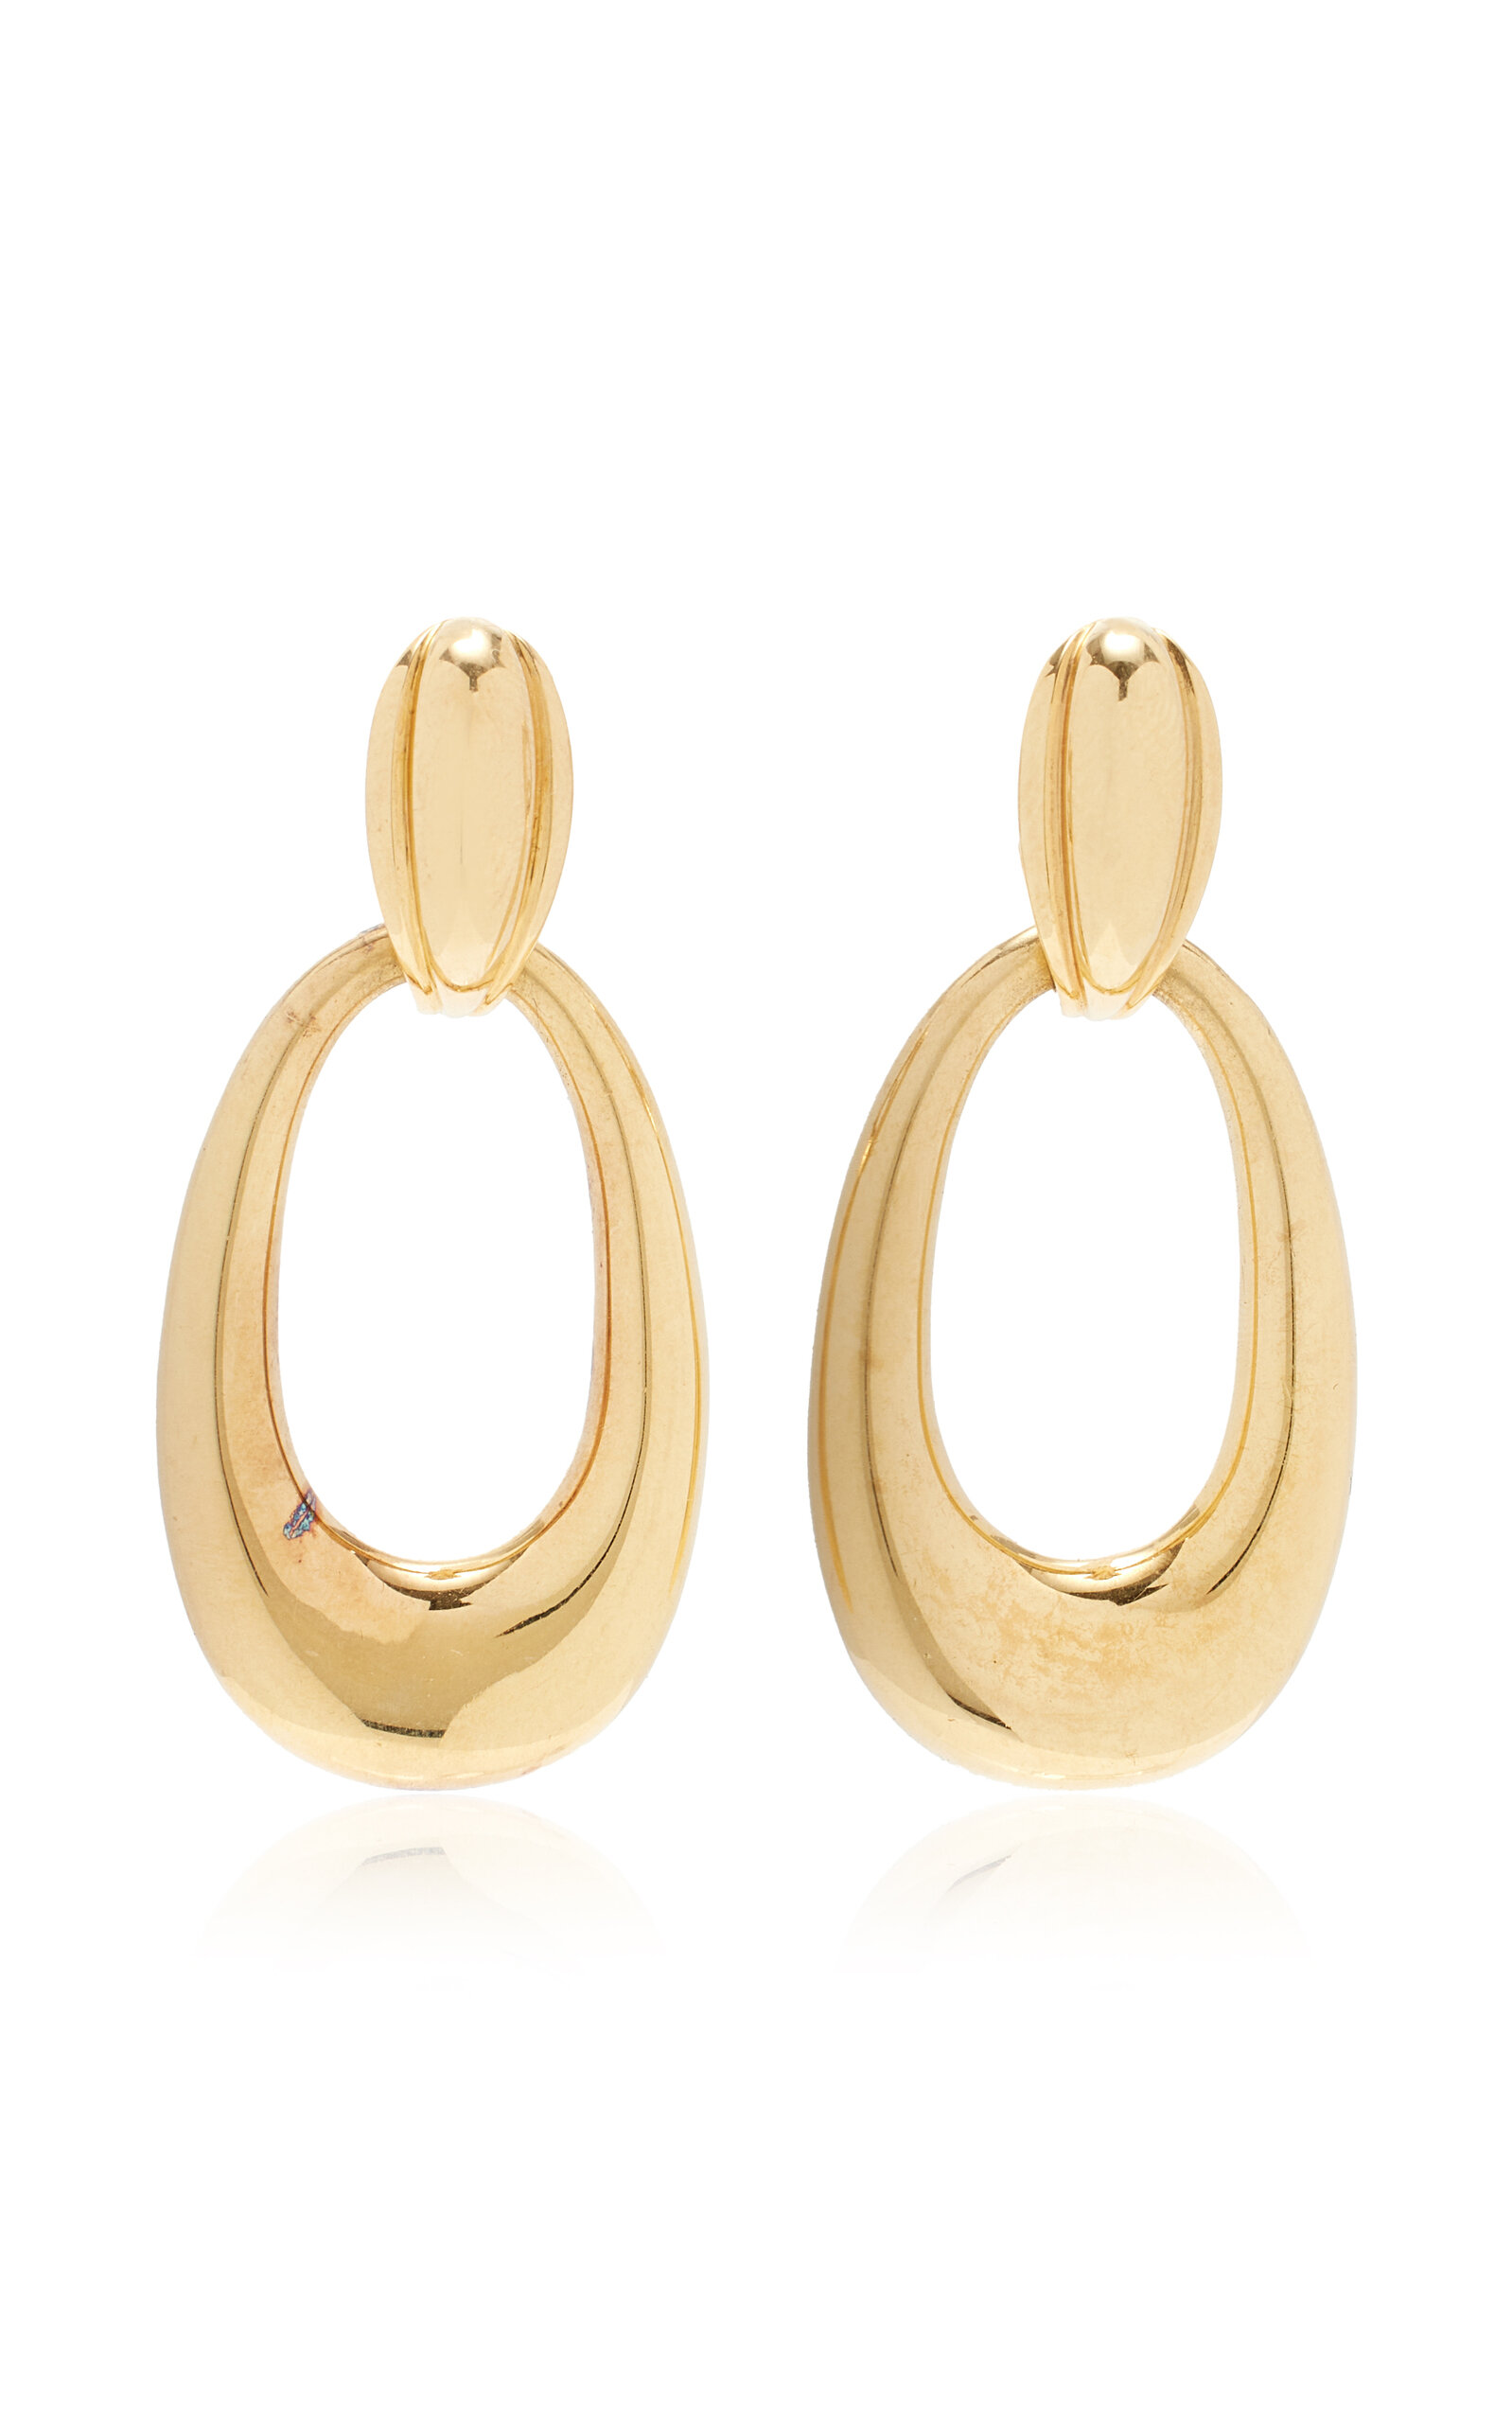 Gold Interchangeable Hoop Earrings; By Georges Lenfant for Cartier